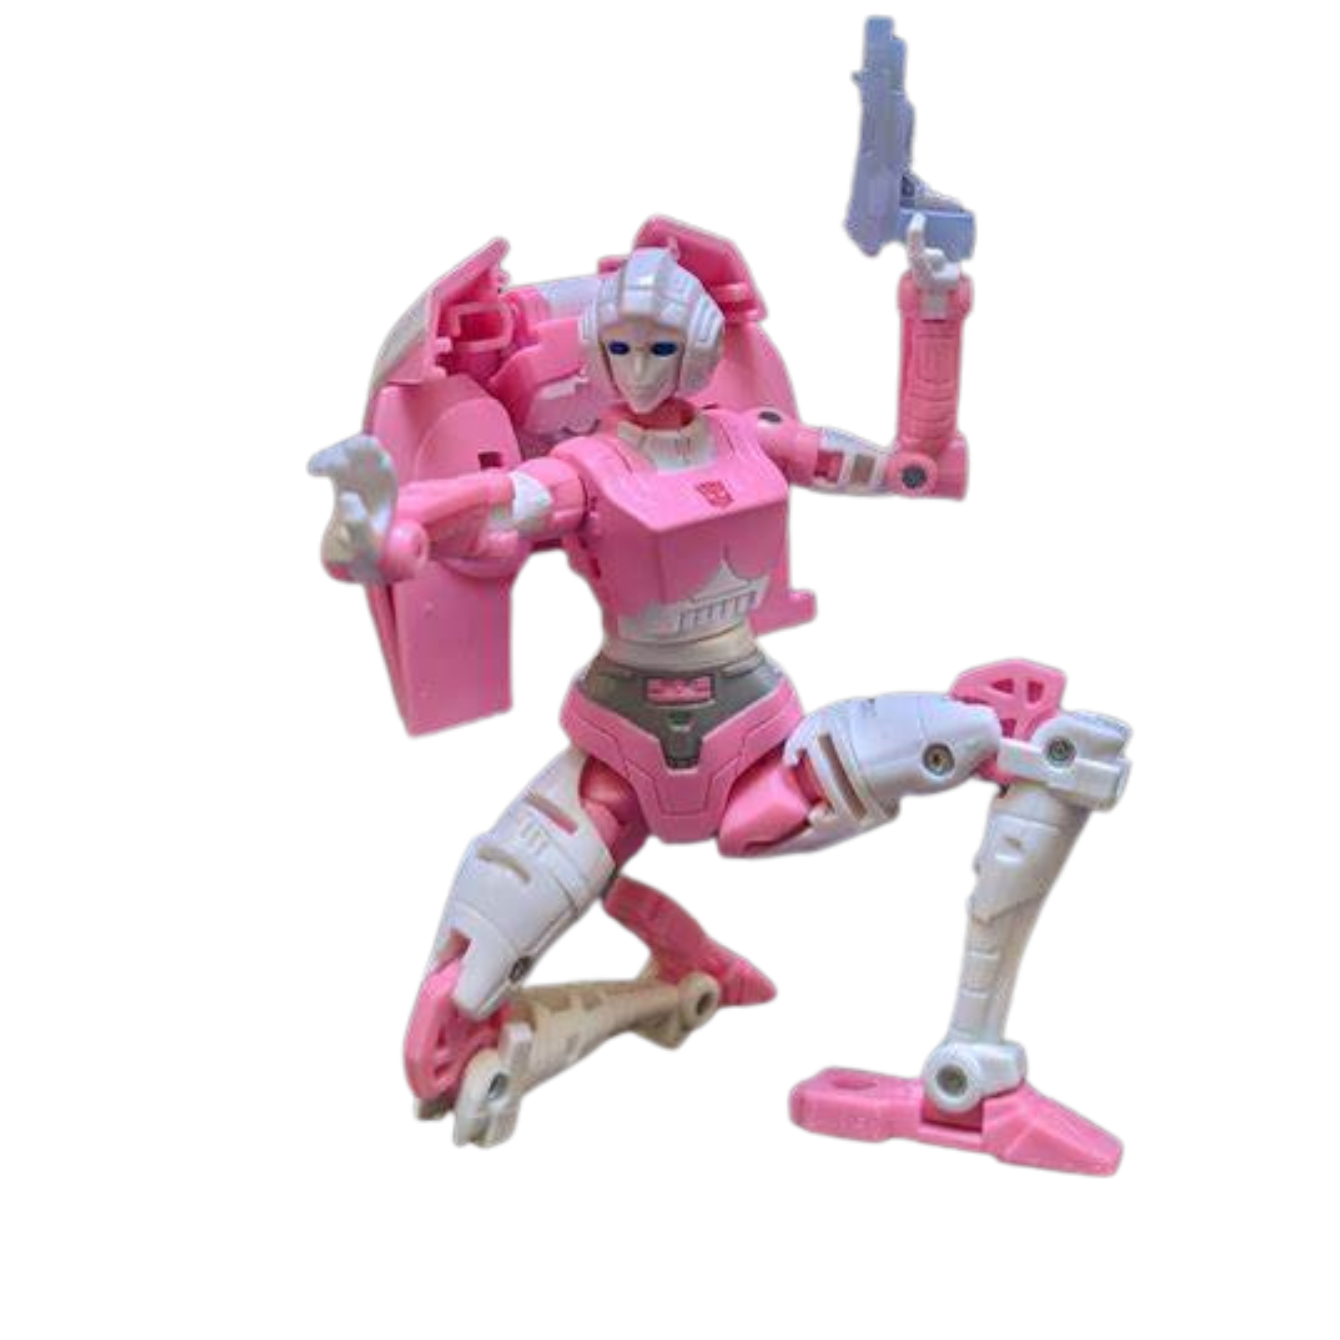 Transformers War For Cybertron Earthrise Deluxe Class WFC-E17 Arcee Action Figure